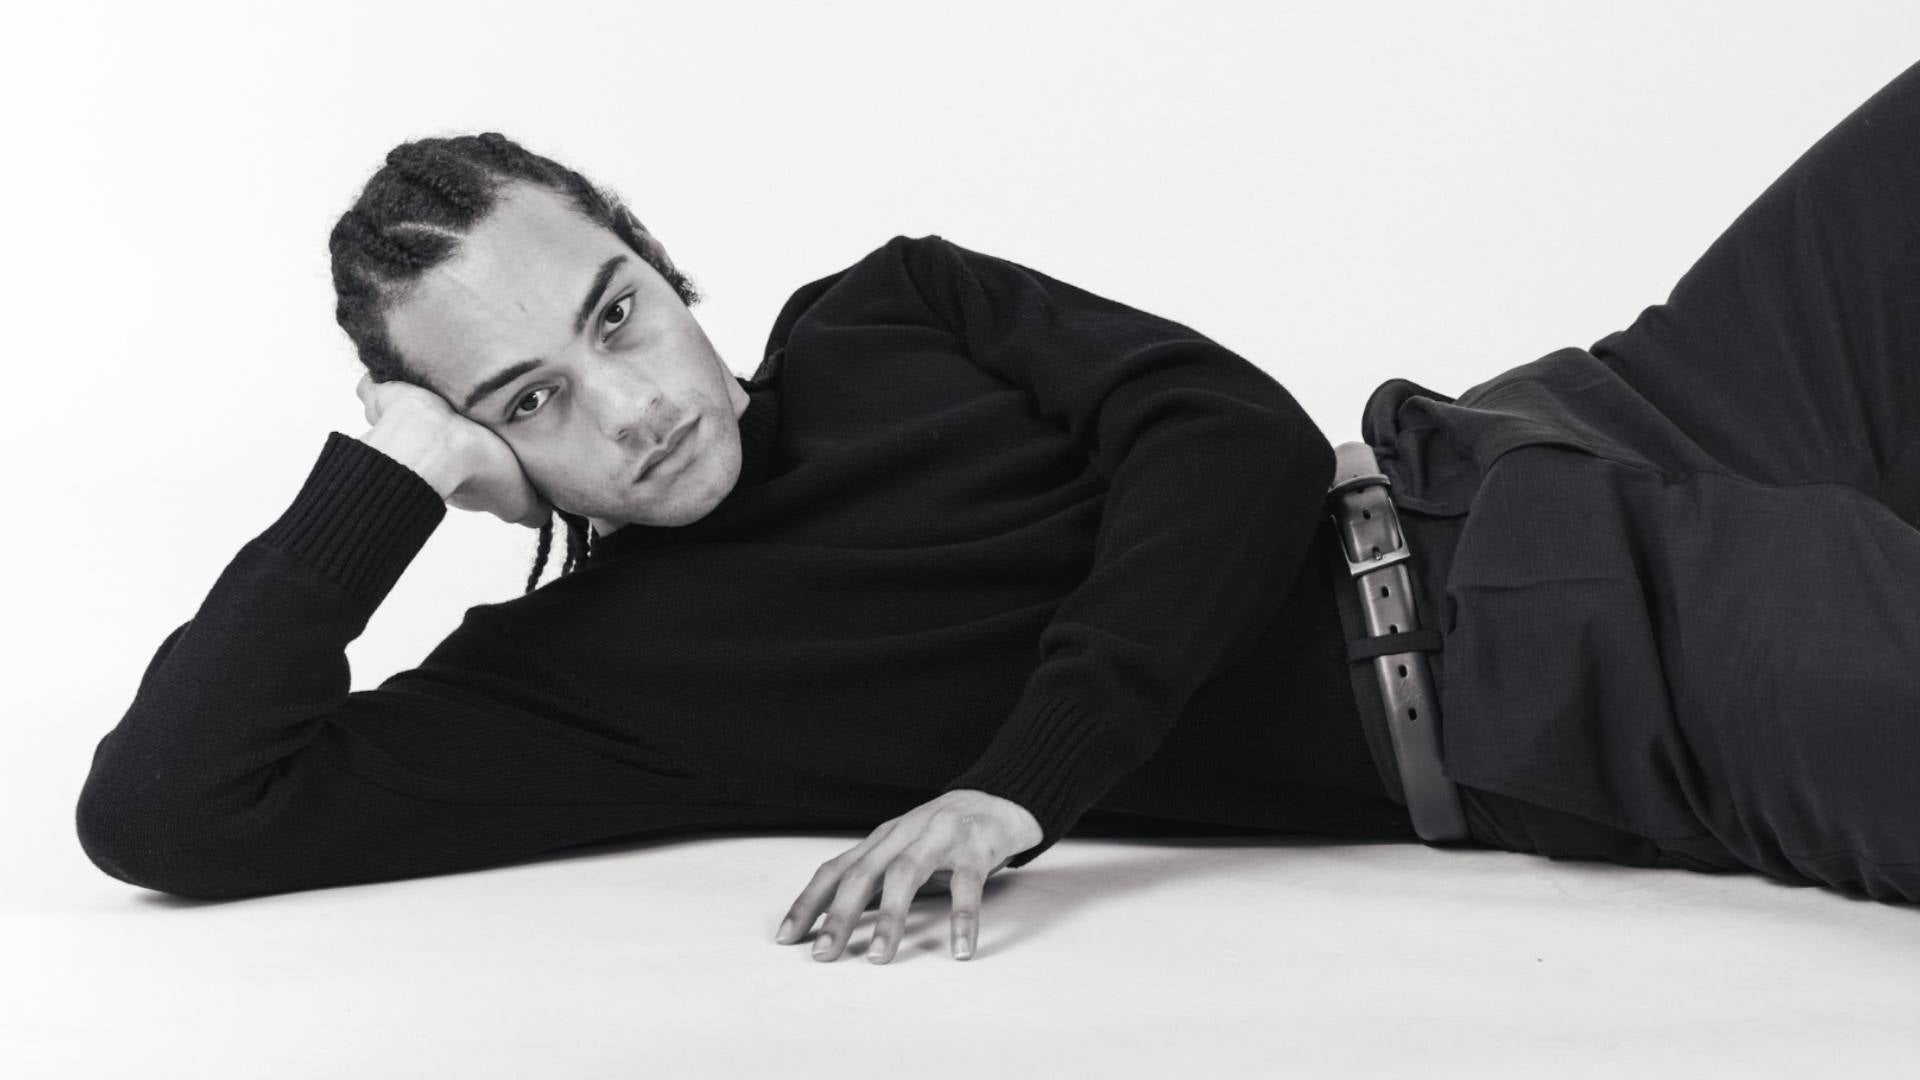 A man lays on the floor and faces the camera while wearing stylish, sustainable clothing from Not Labeled. The photo is in black and white.